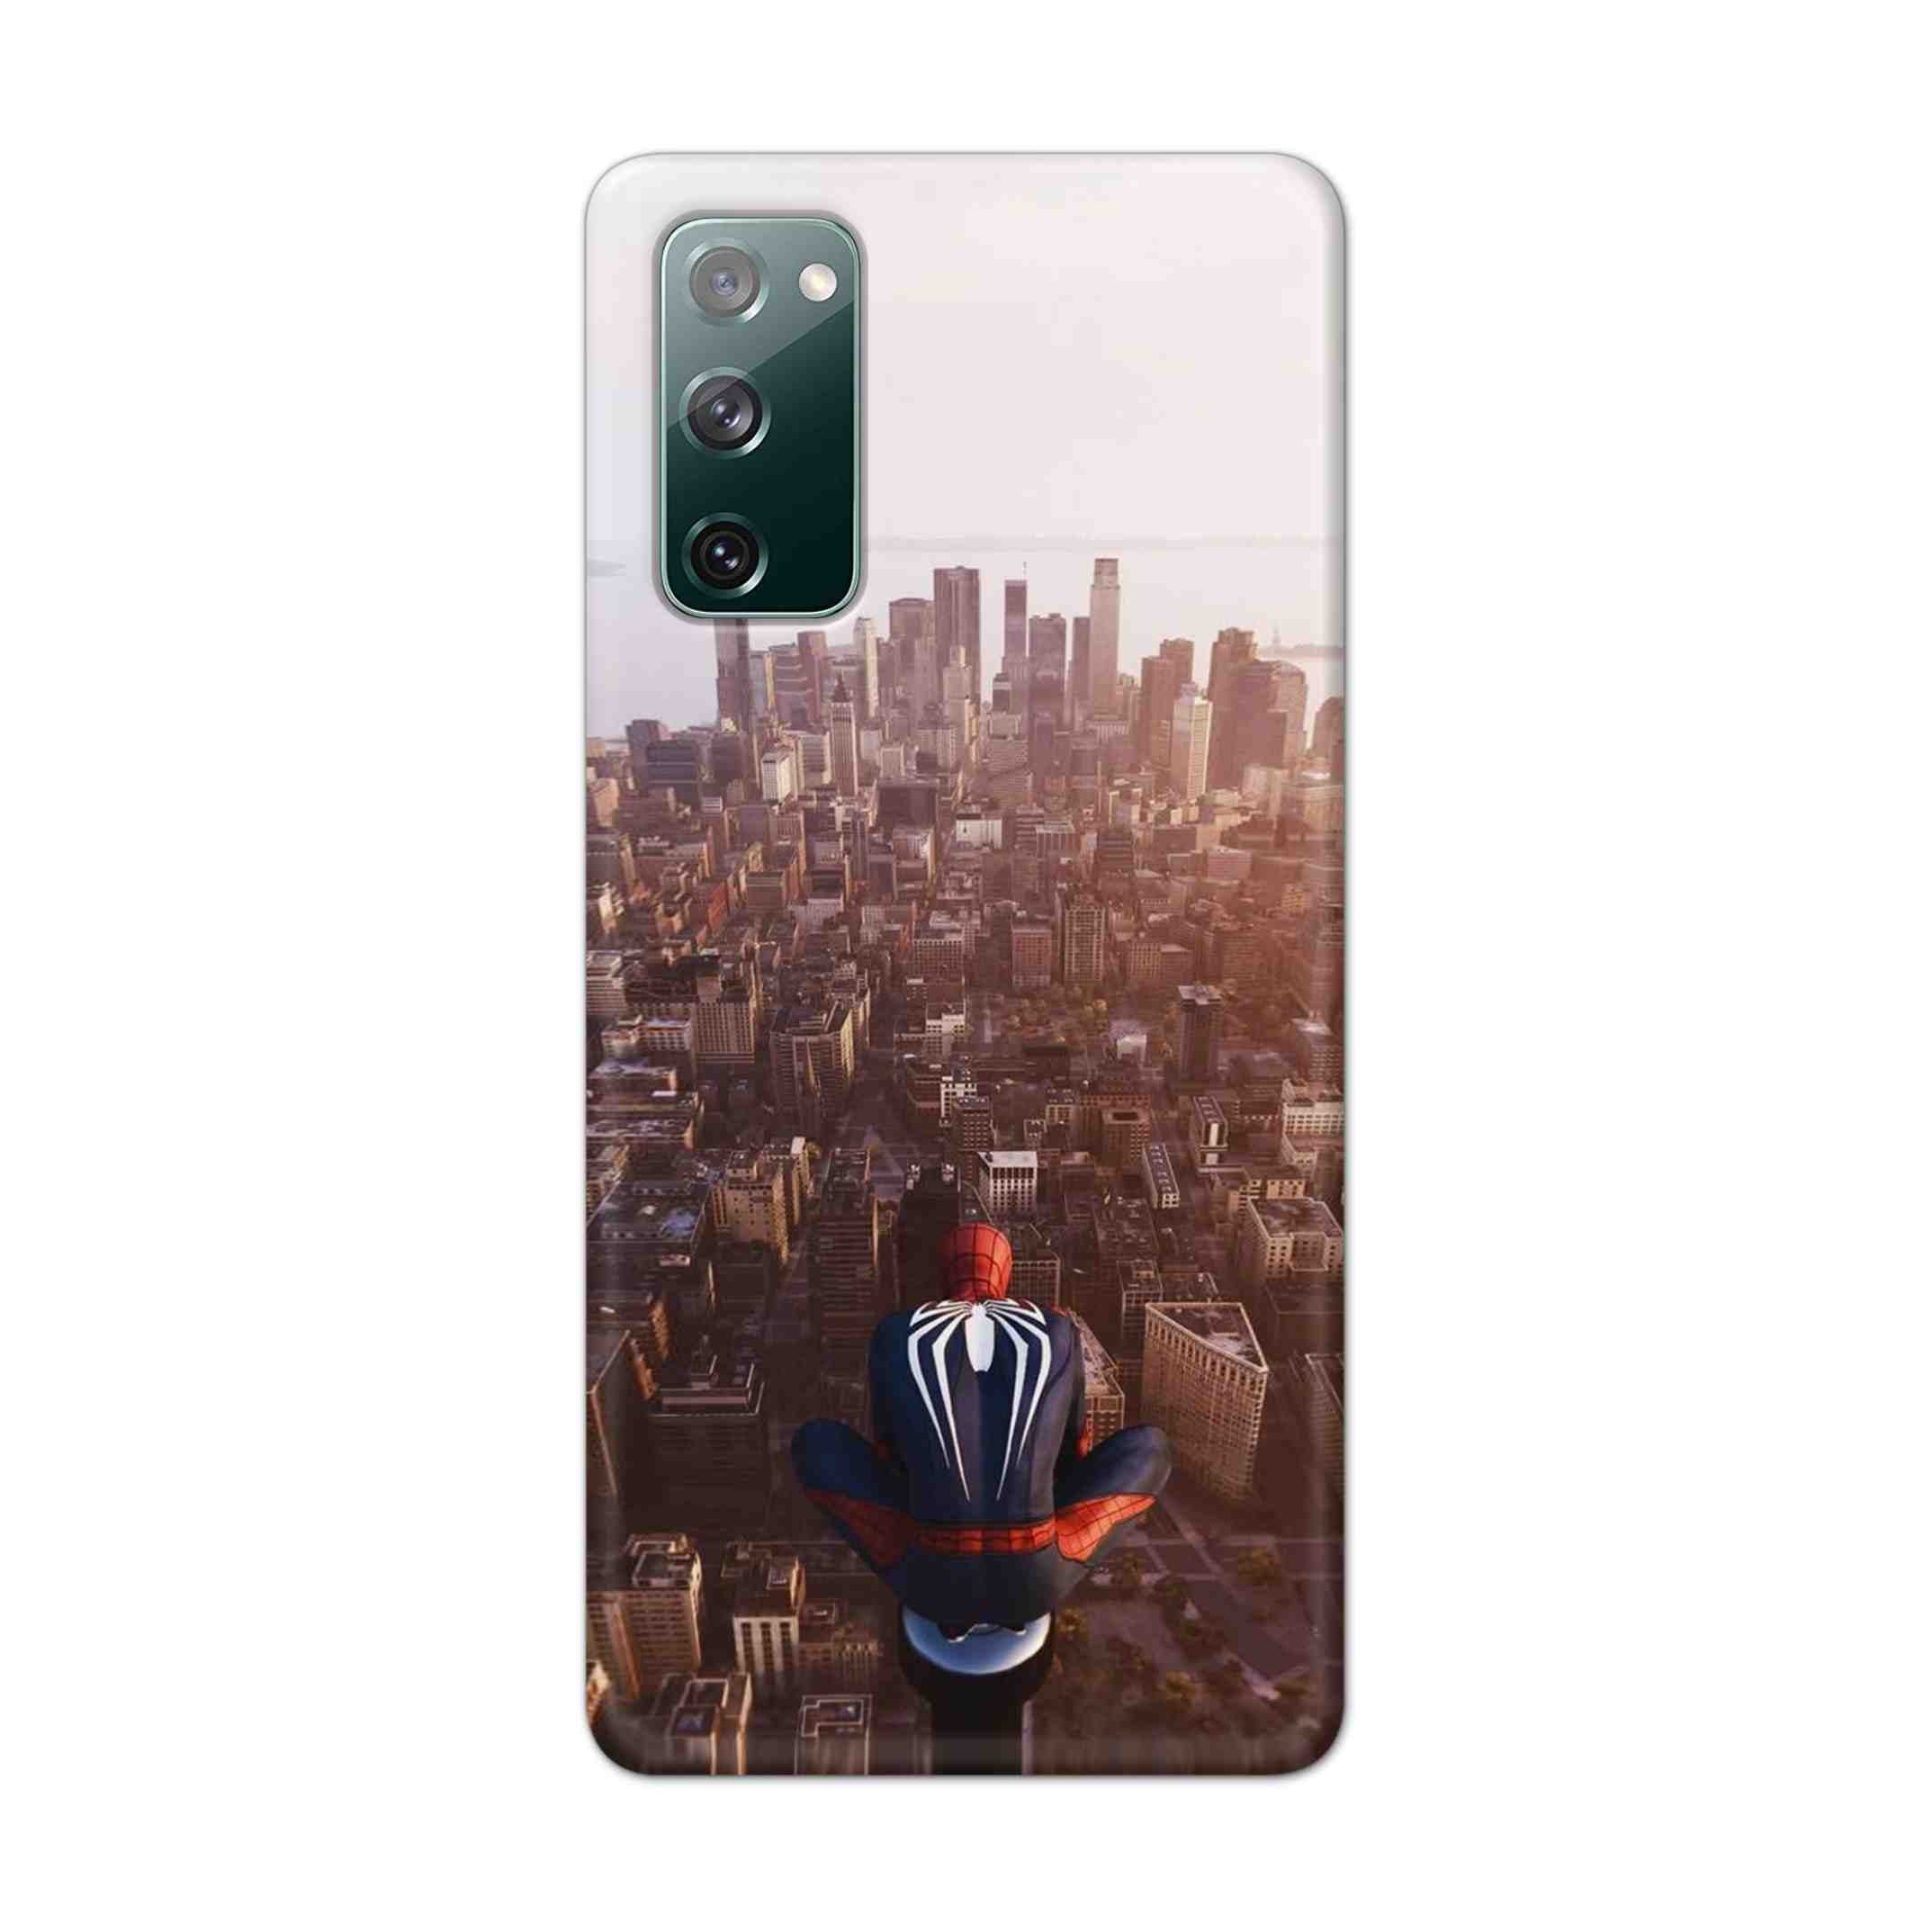 Buy City Of Spiderman Hard Back Mobile Phone Case Cover For Samsung Galaxy S20 FE Online